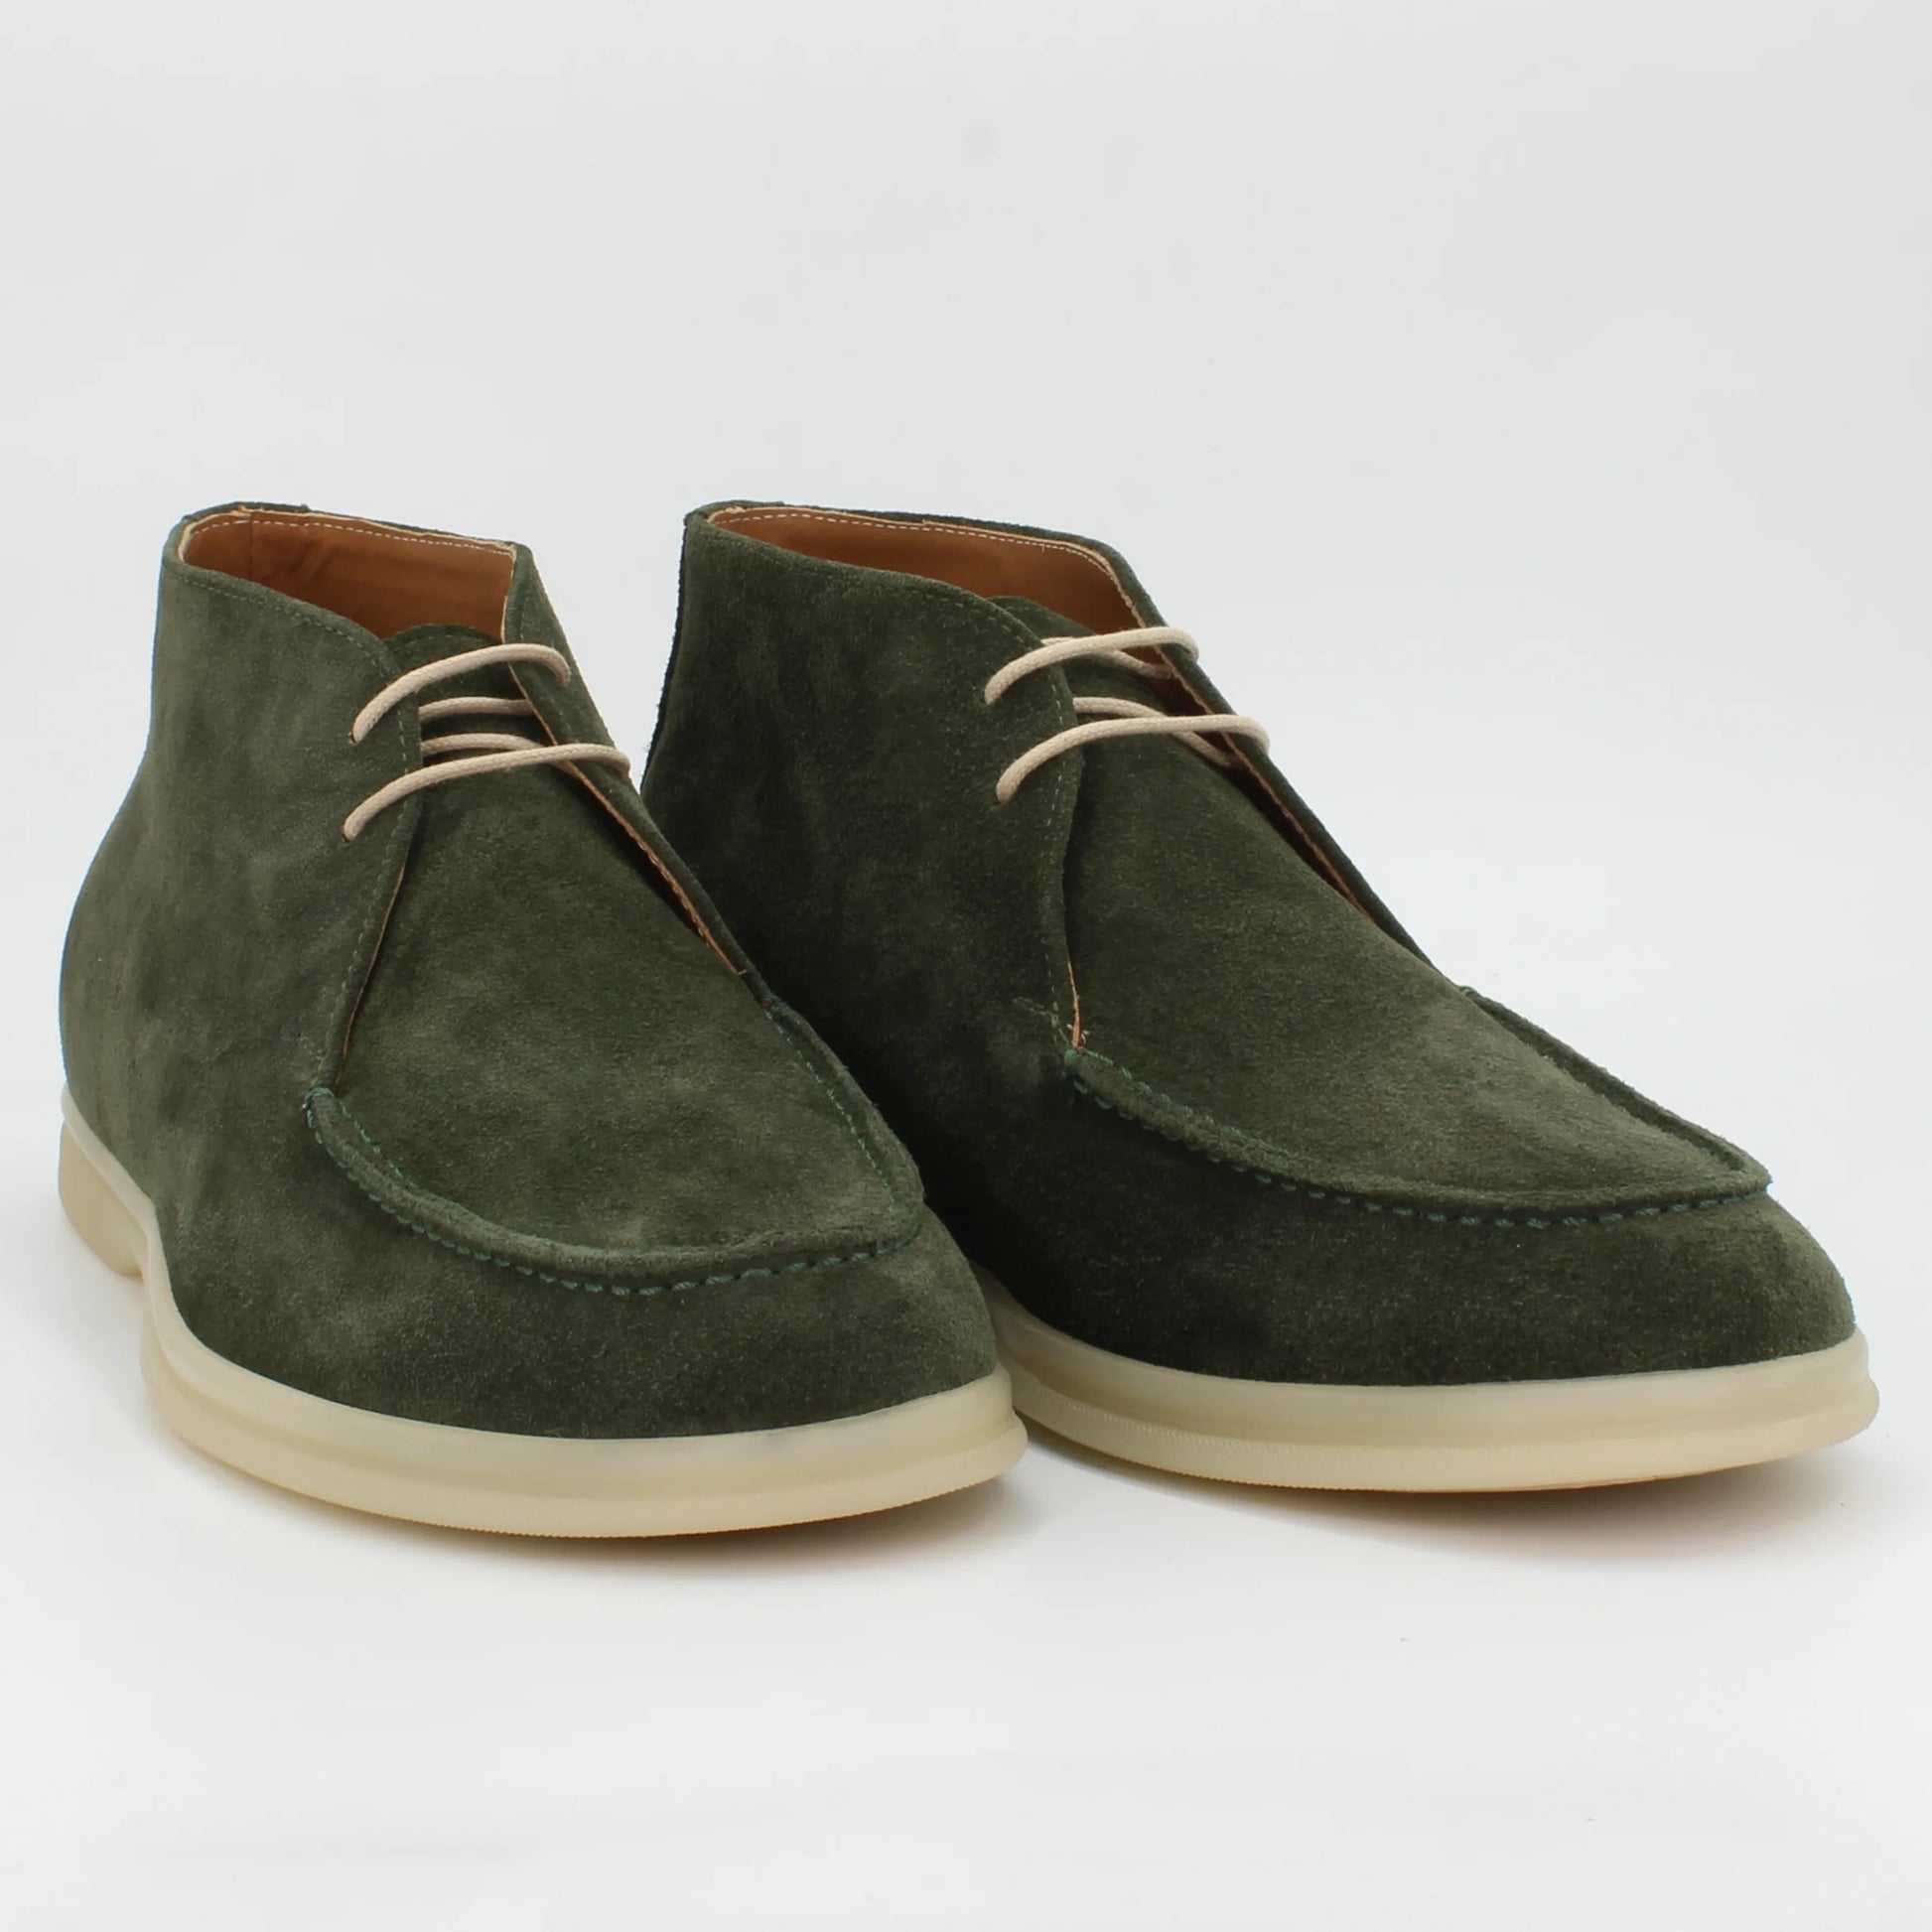 Shop Handmade Italian Leather suede chukka boot in verde (BEED05)  or browse our range of hand-made Italian shoes for men in leather or suede in-store at Aliverti Cape Town, or shop online. We deliver in South Africa & offer multiple payment plans as well as accept multiple safe & secure payment methods.